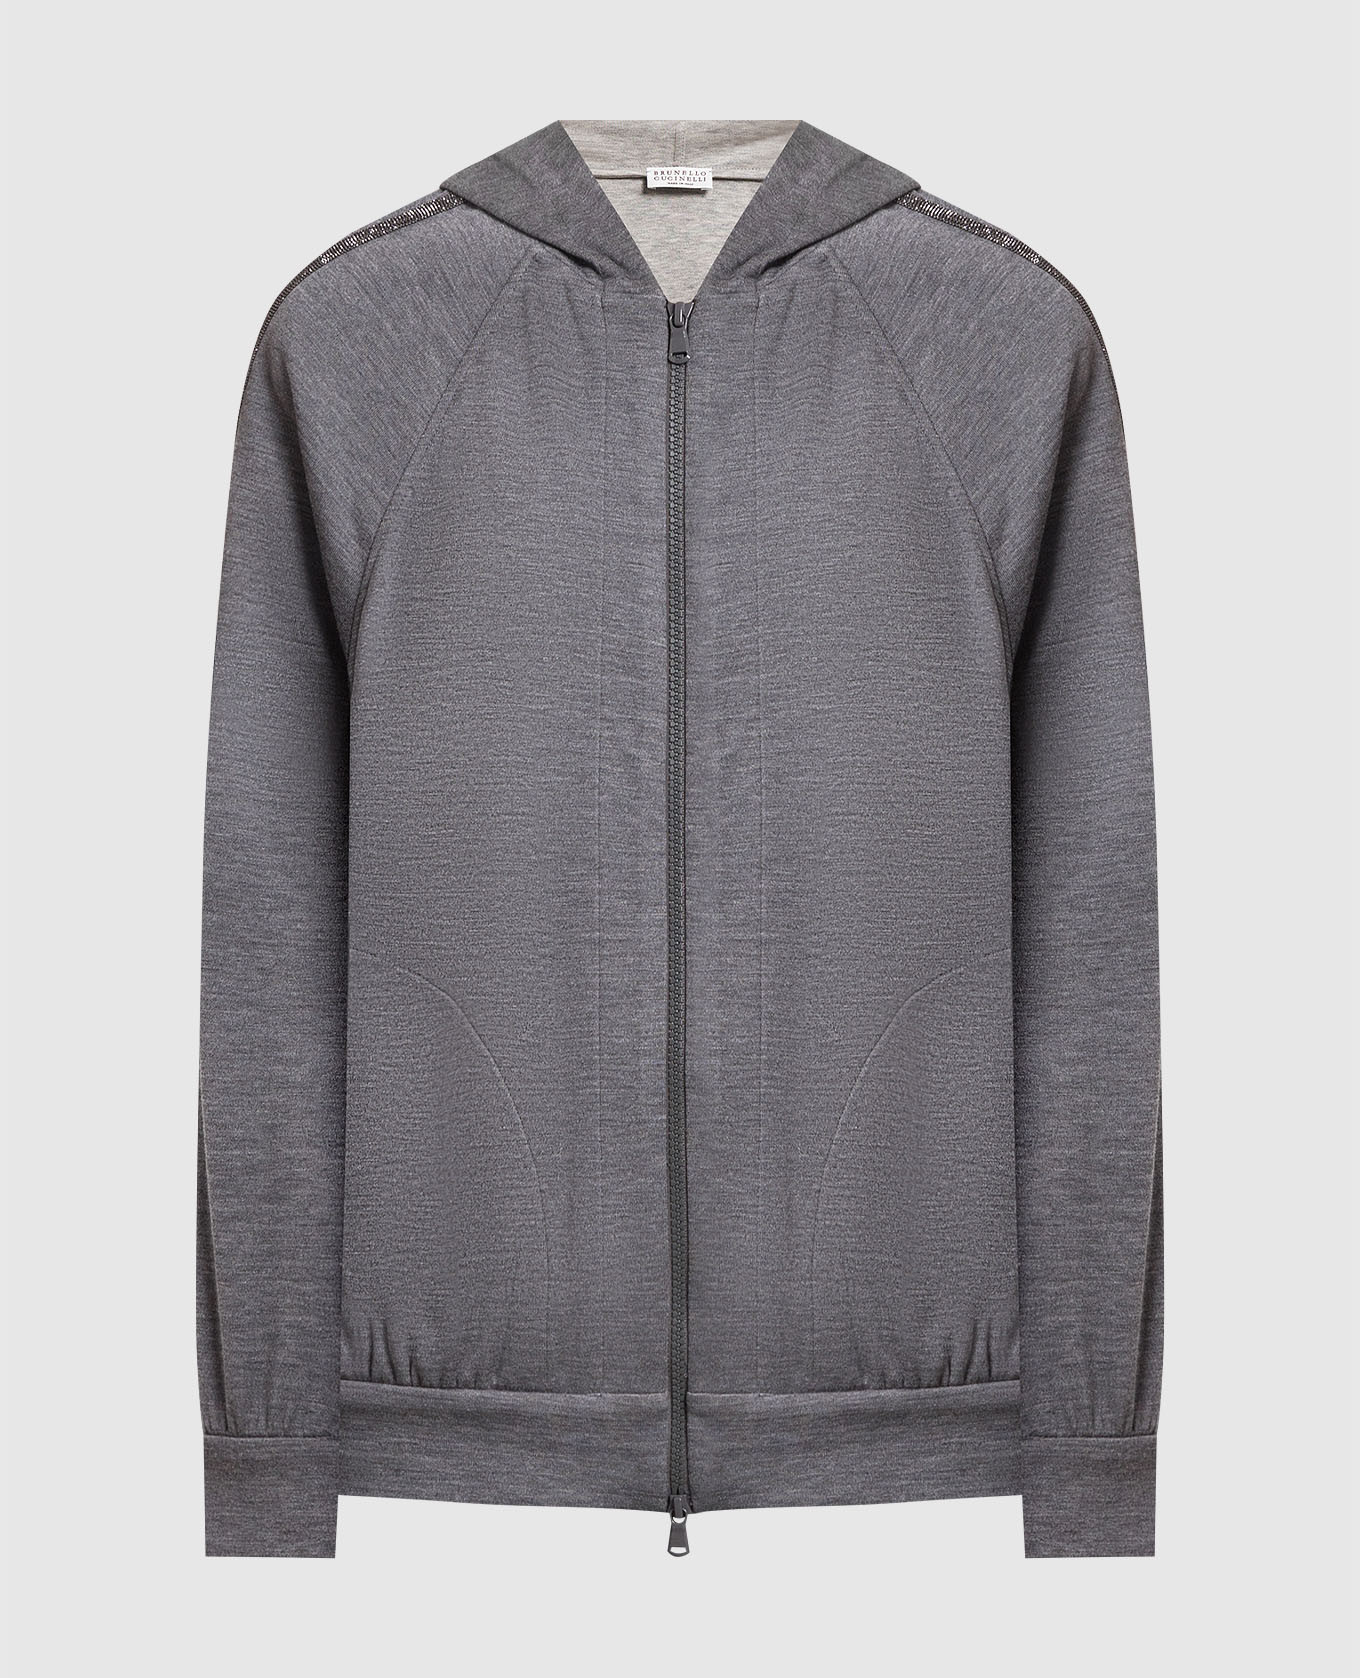 Gray sports jacket with monil chain